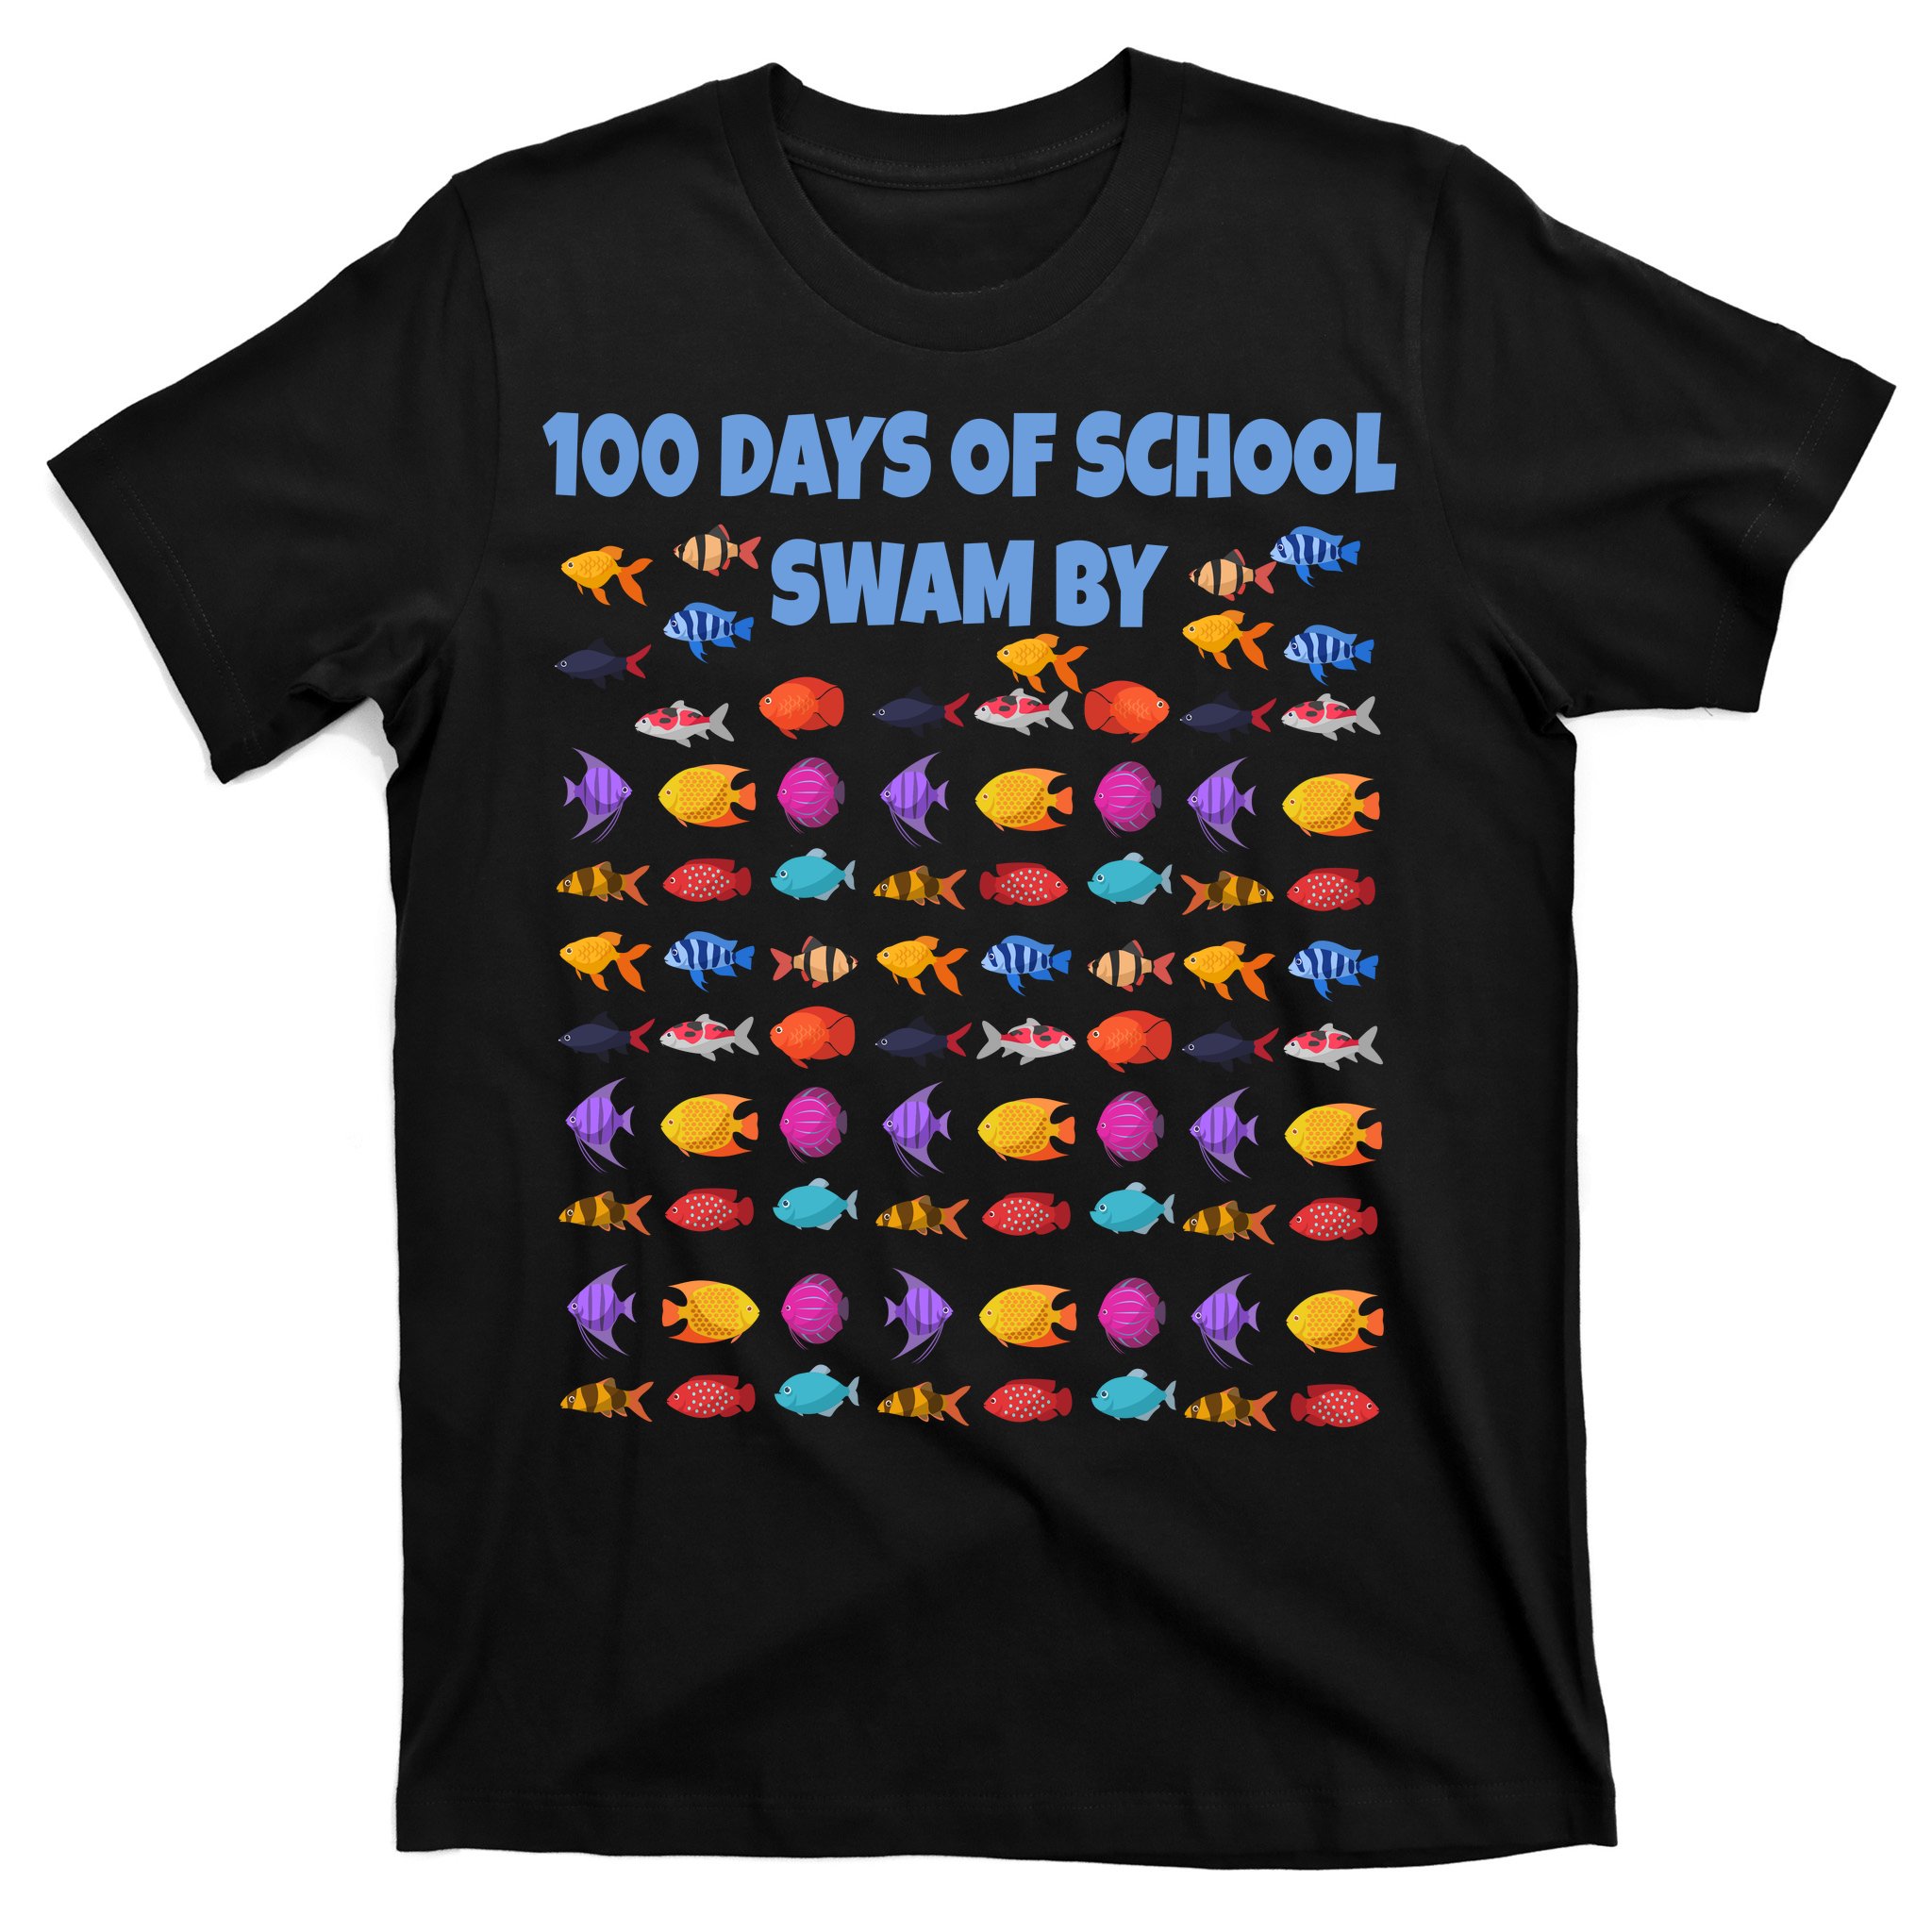 https://images3.teeshirtpalace.com/images/productImages/100-days-of-school-swam-by-fish--black-at-garment.jpg